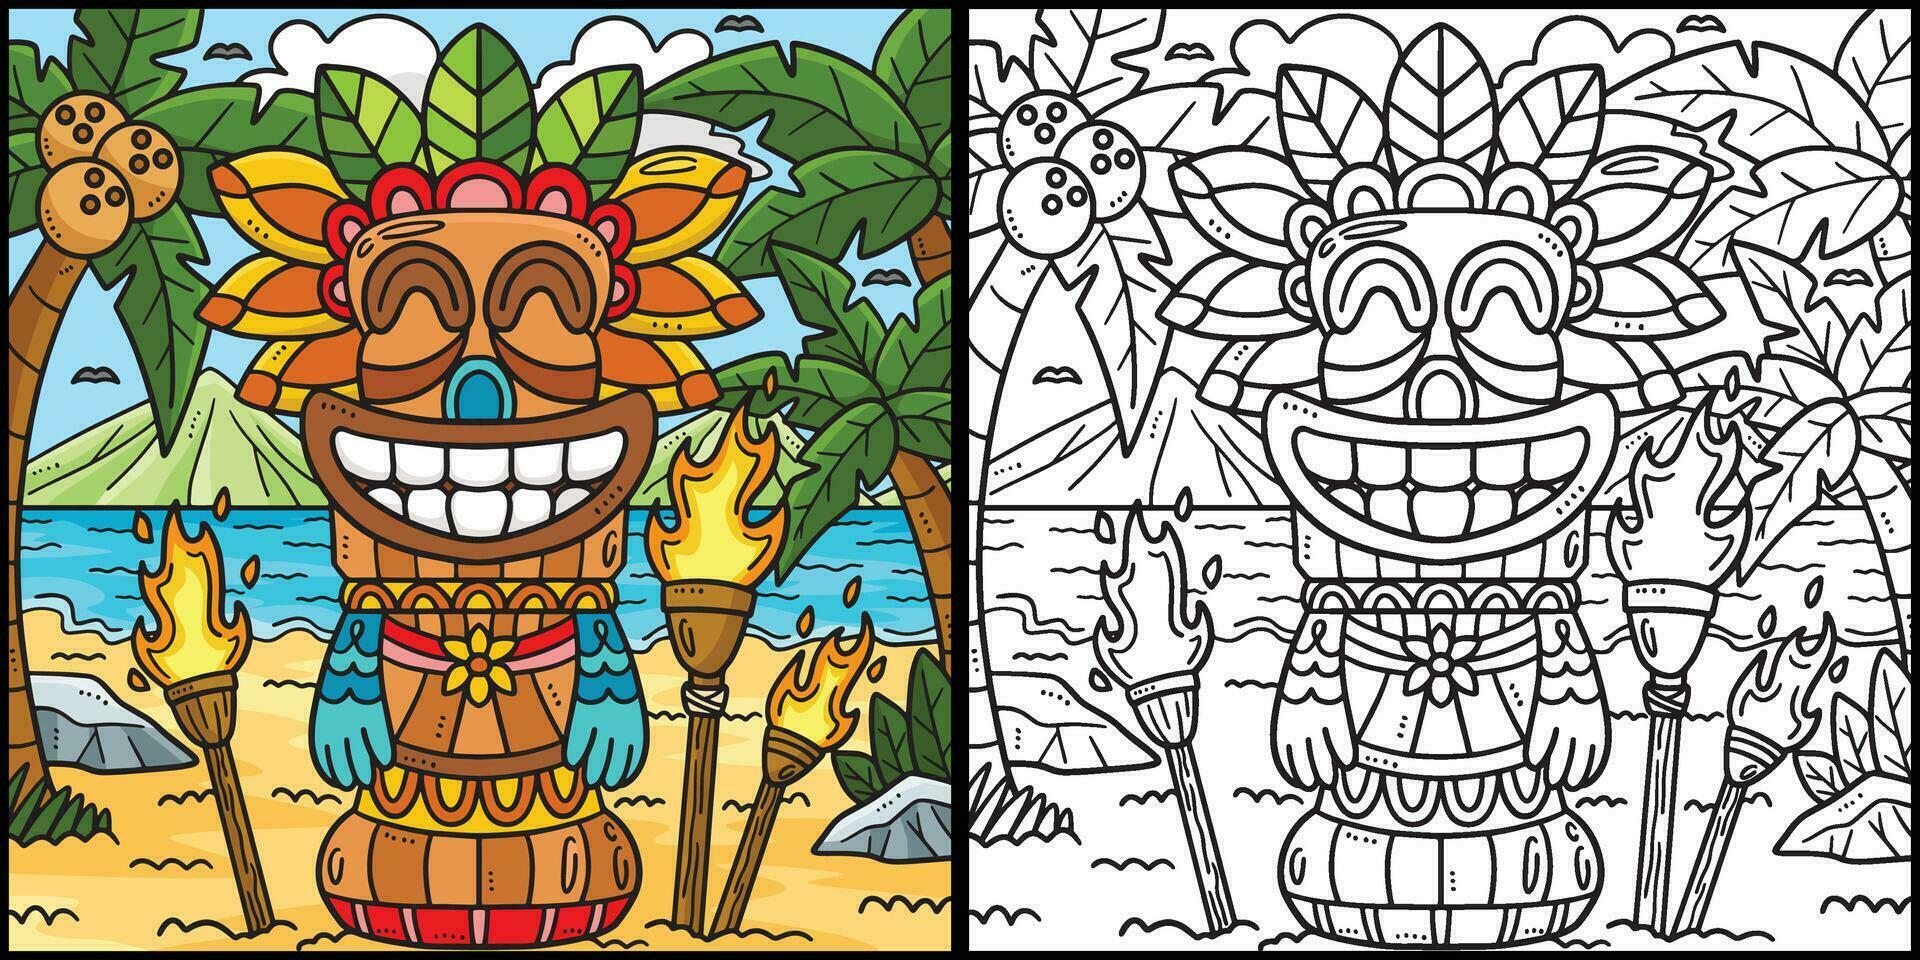 Summer Tiki Totem Pole Coloring Page Illustration vector